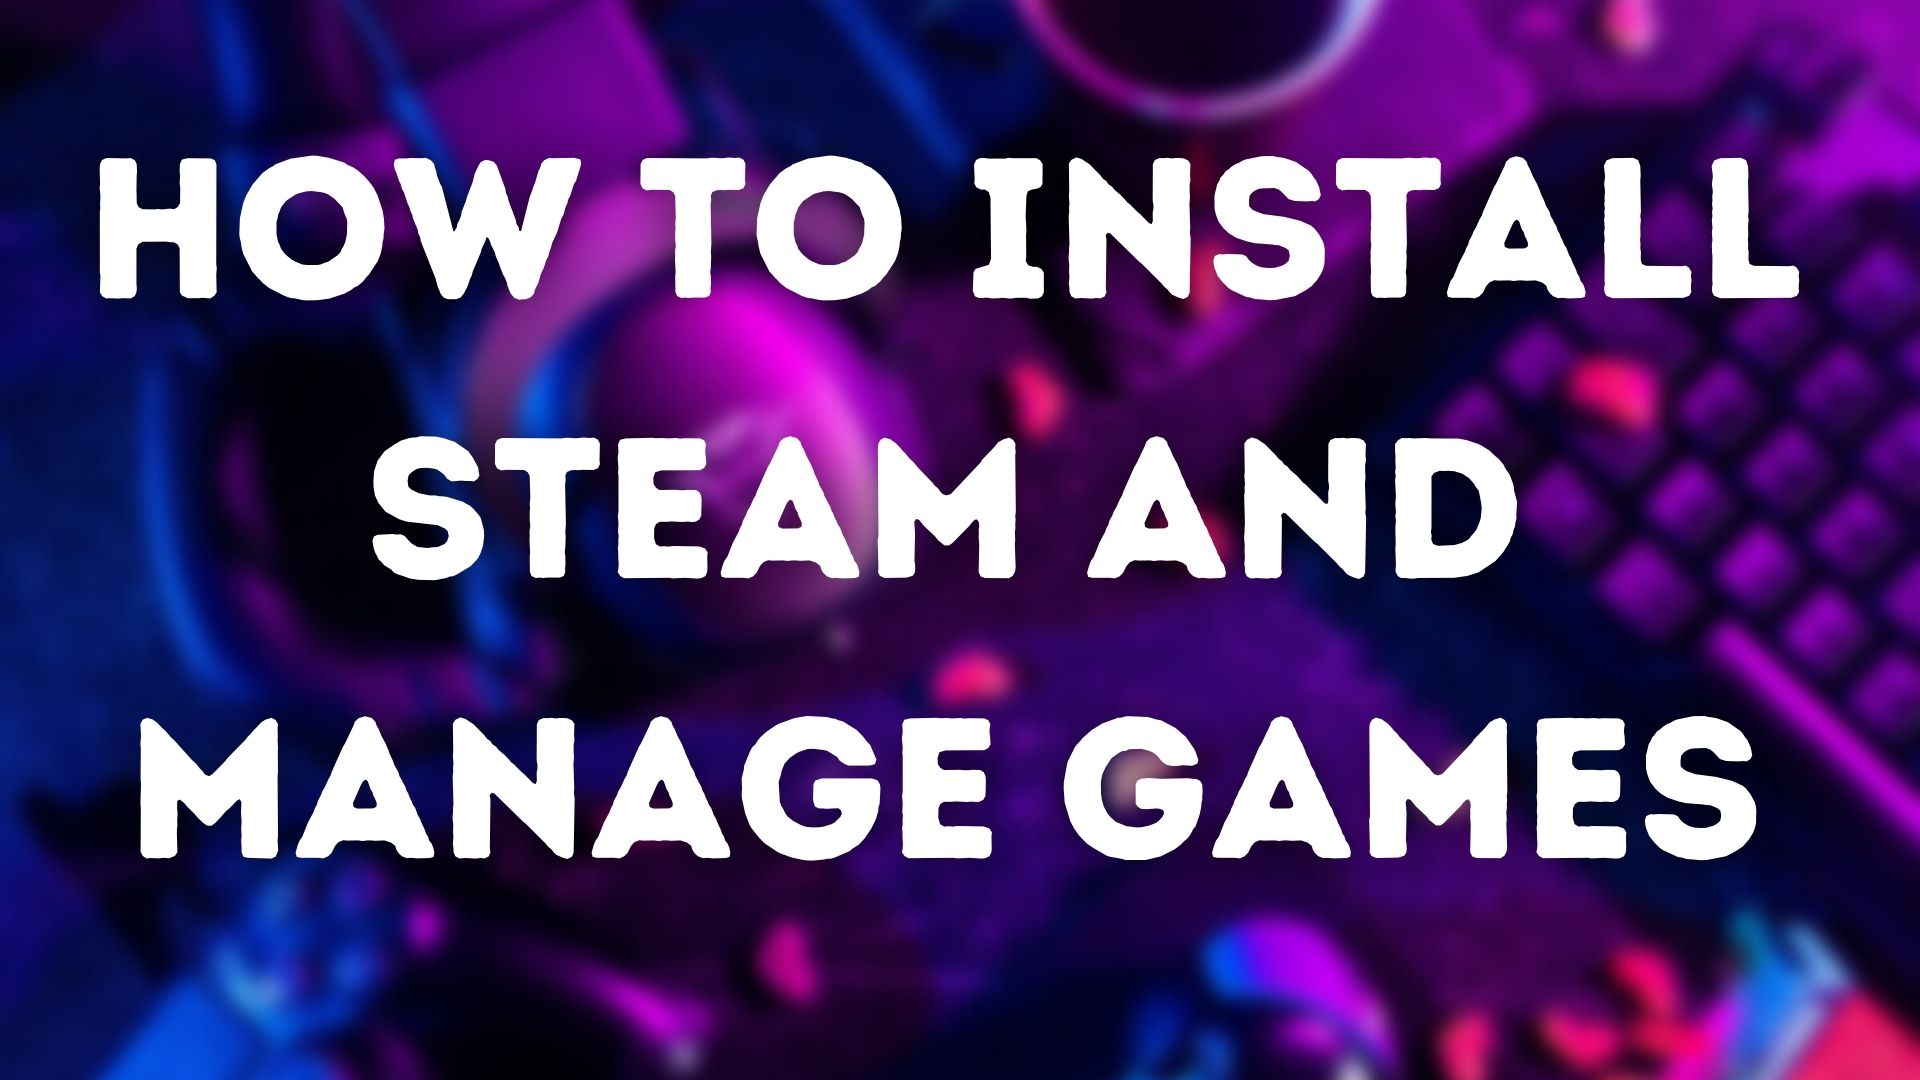 How to Download Games from Steam 